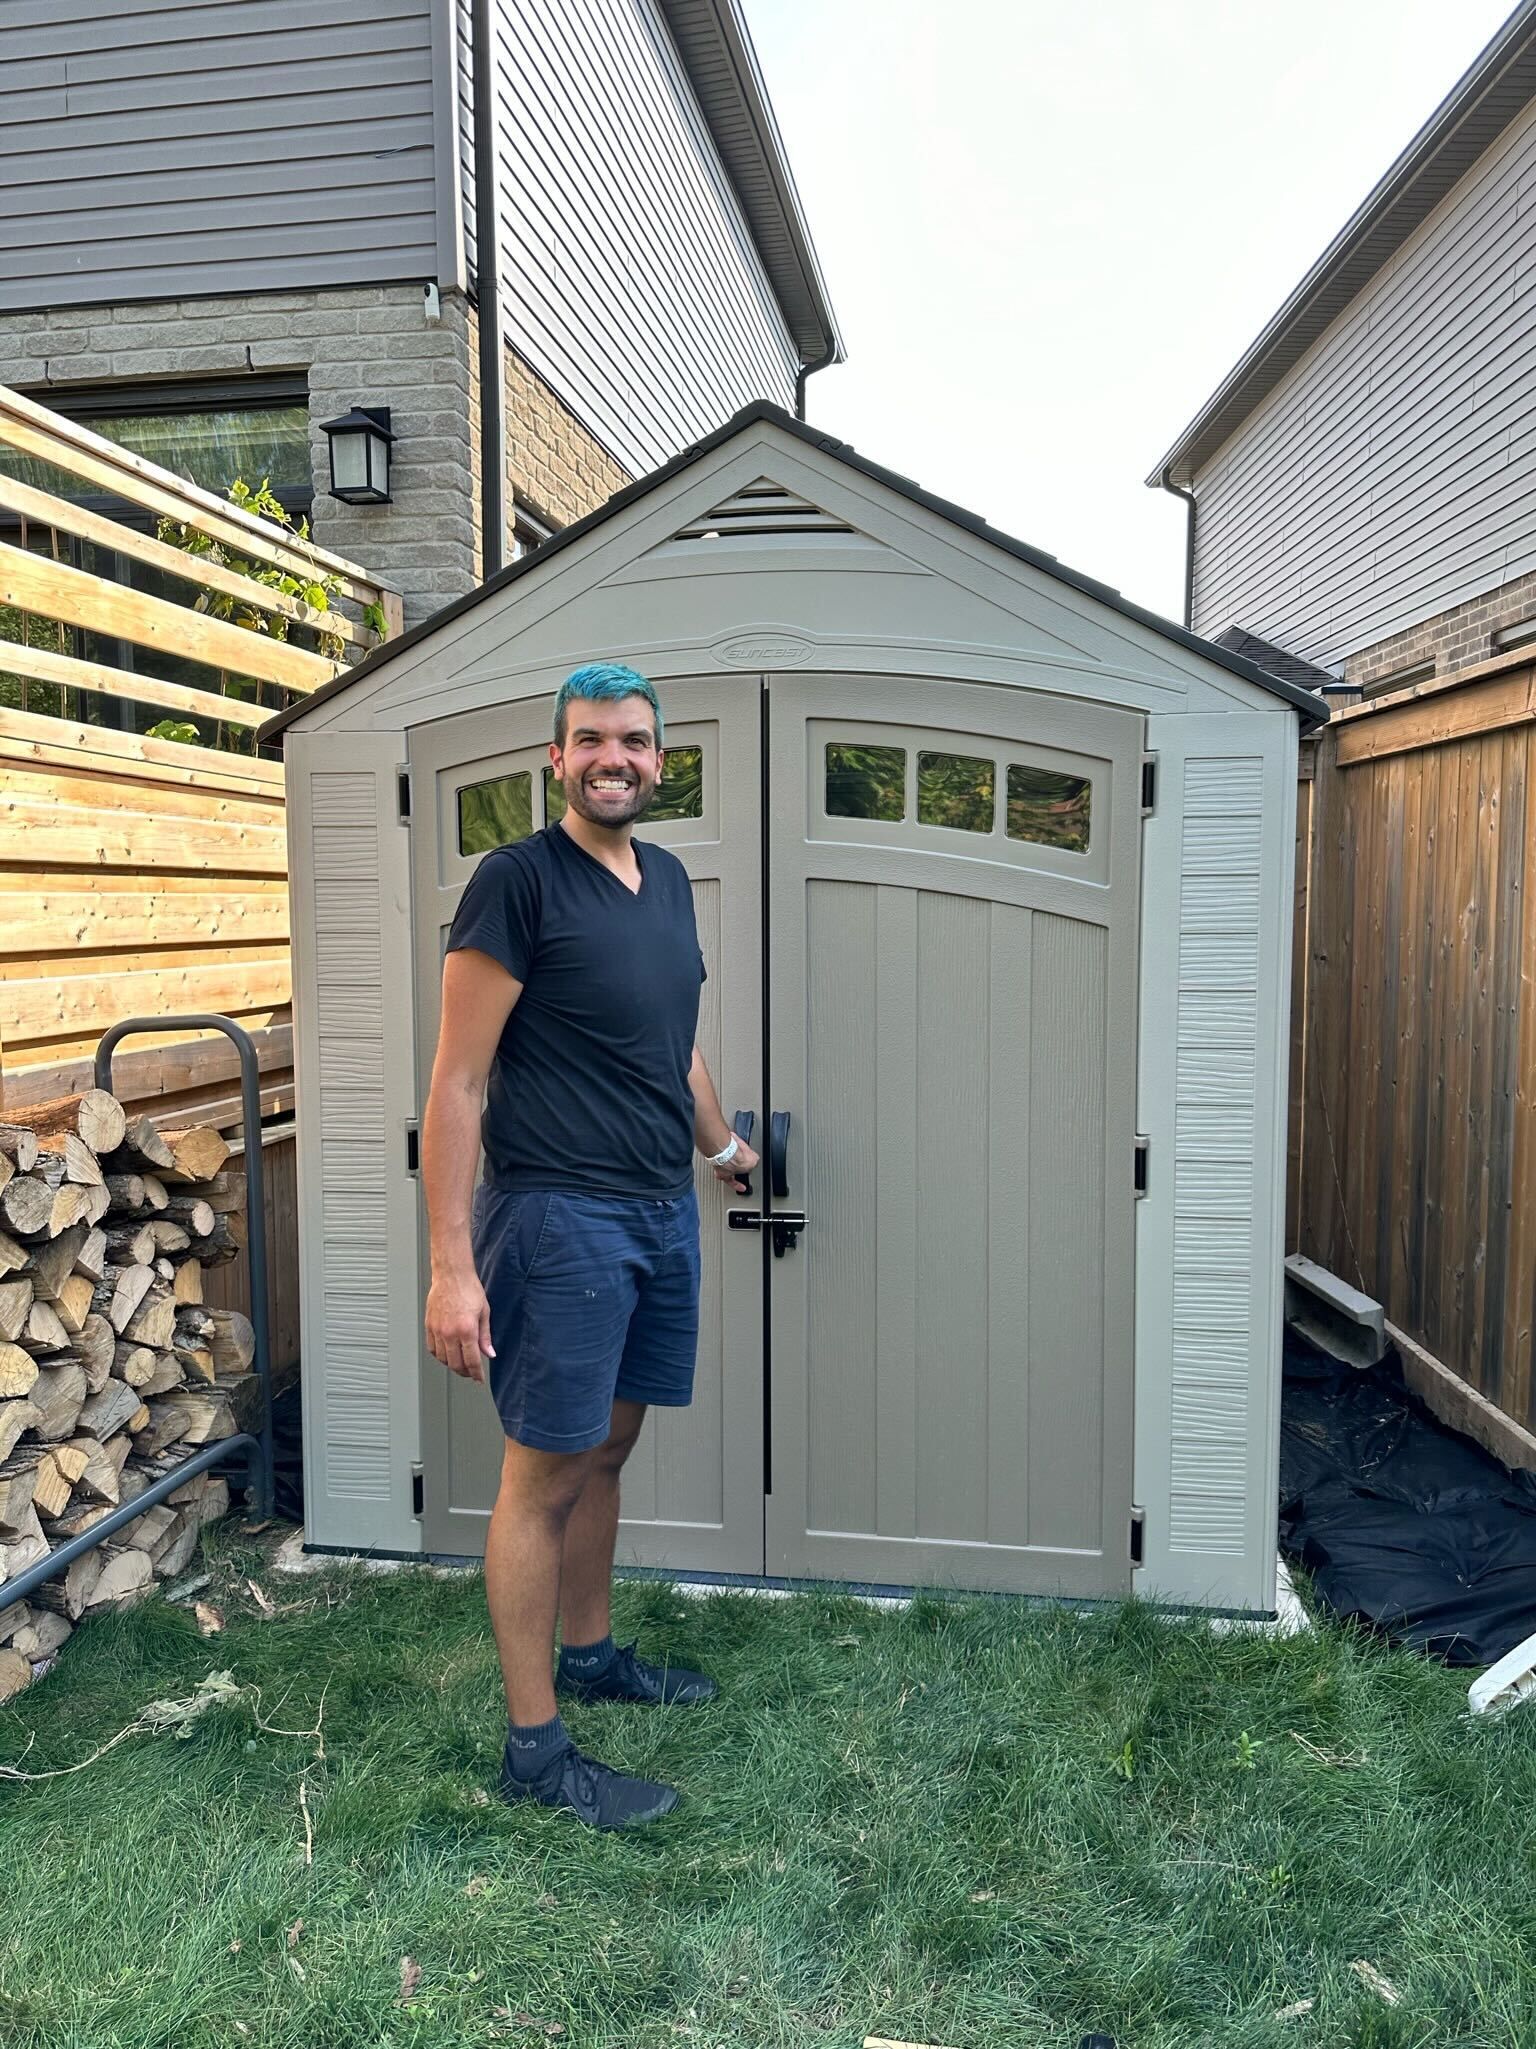 Jason posed with his homebuilt shed